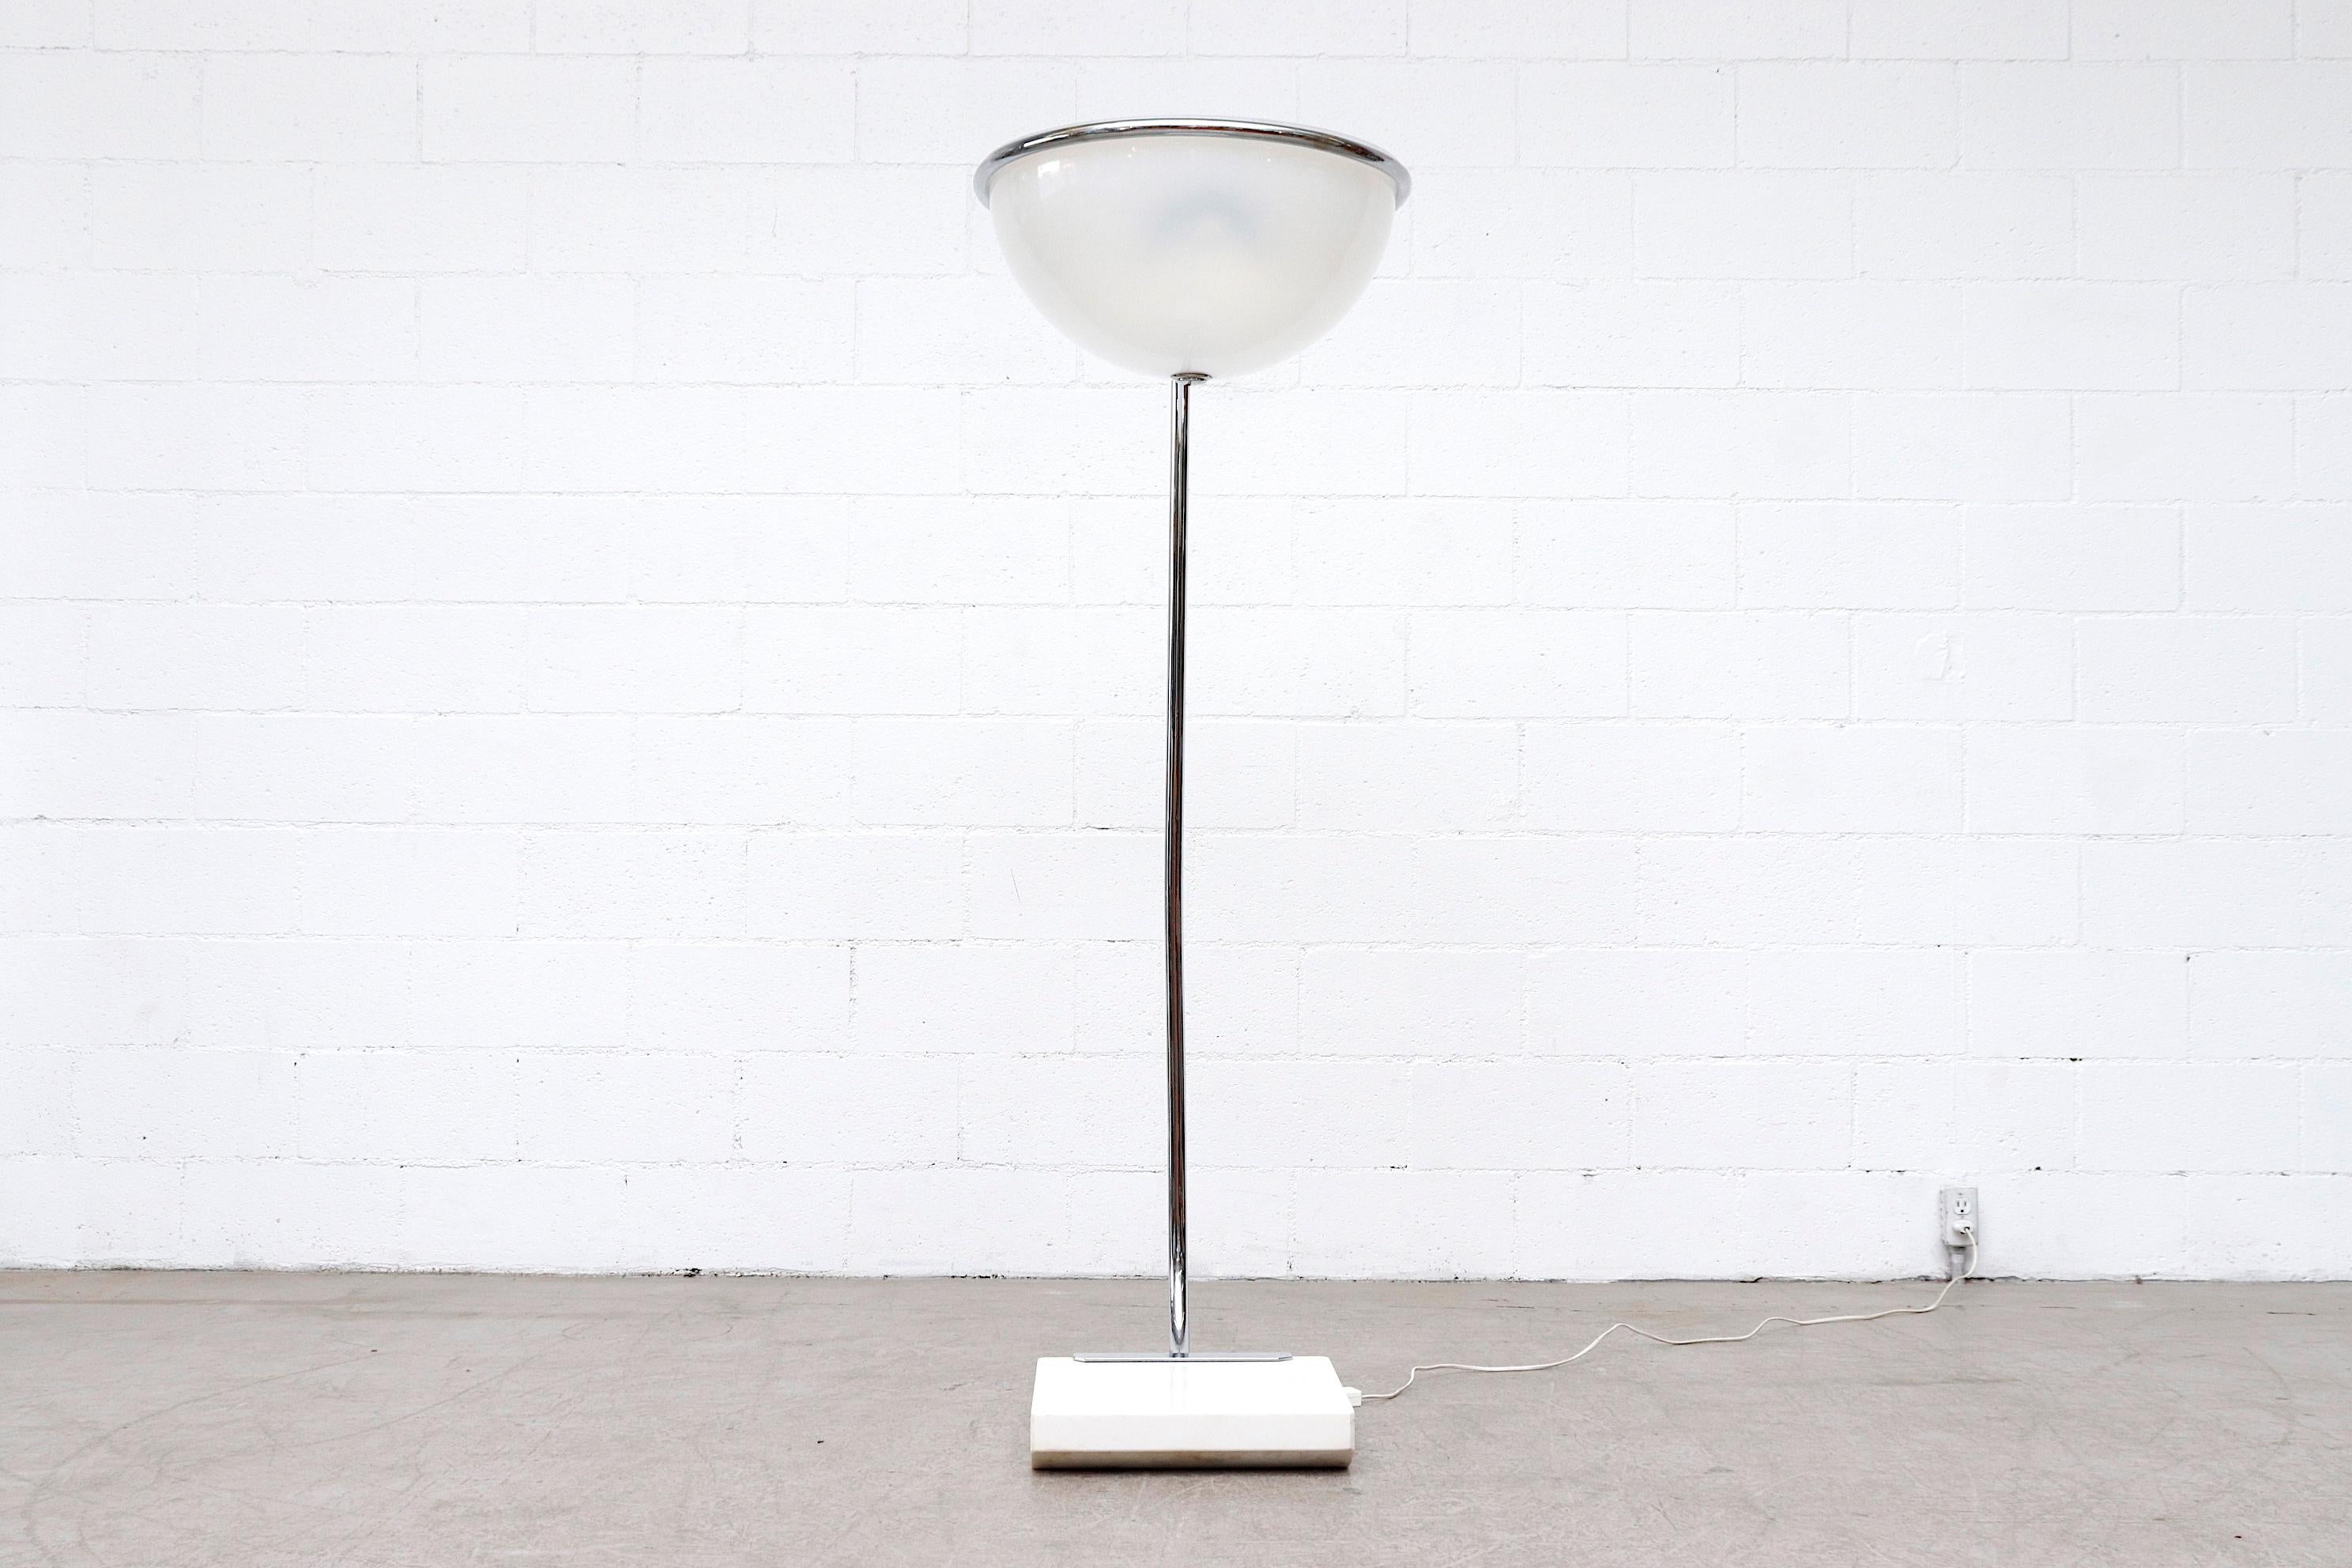 Awesome 1970s modern floor lamp from a Town Hall in the Netherlands. Lamp has a fat tubular chrome frame, heavy marble base and plexiglass domed shade. In original condition with visible wear, including scratching, and some chipping to marble.